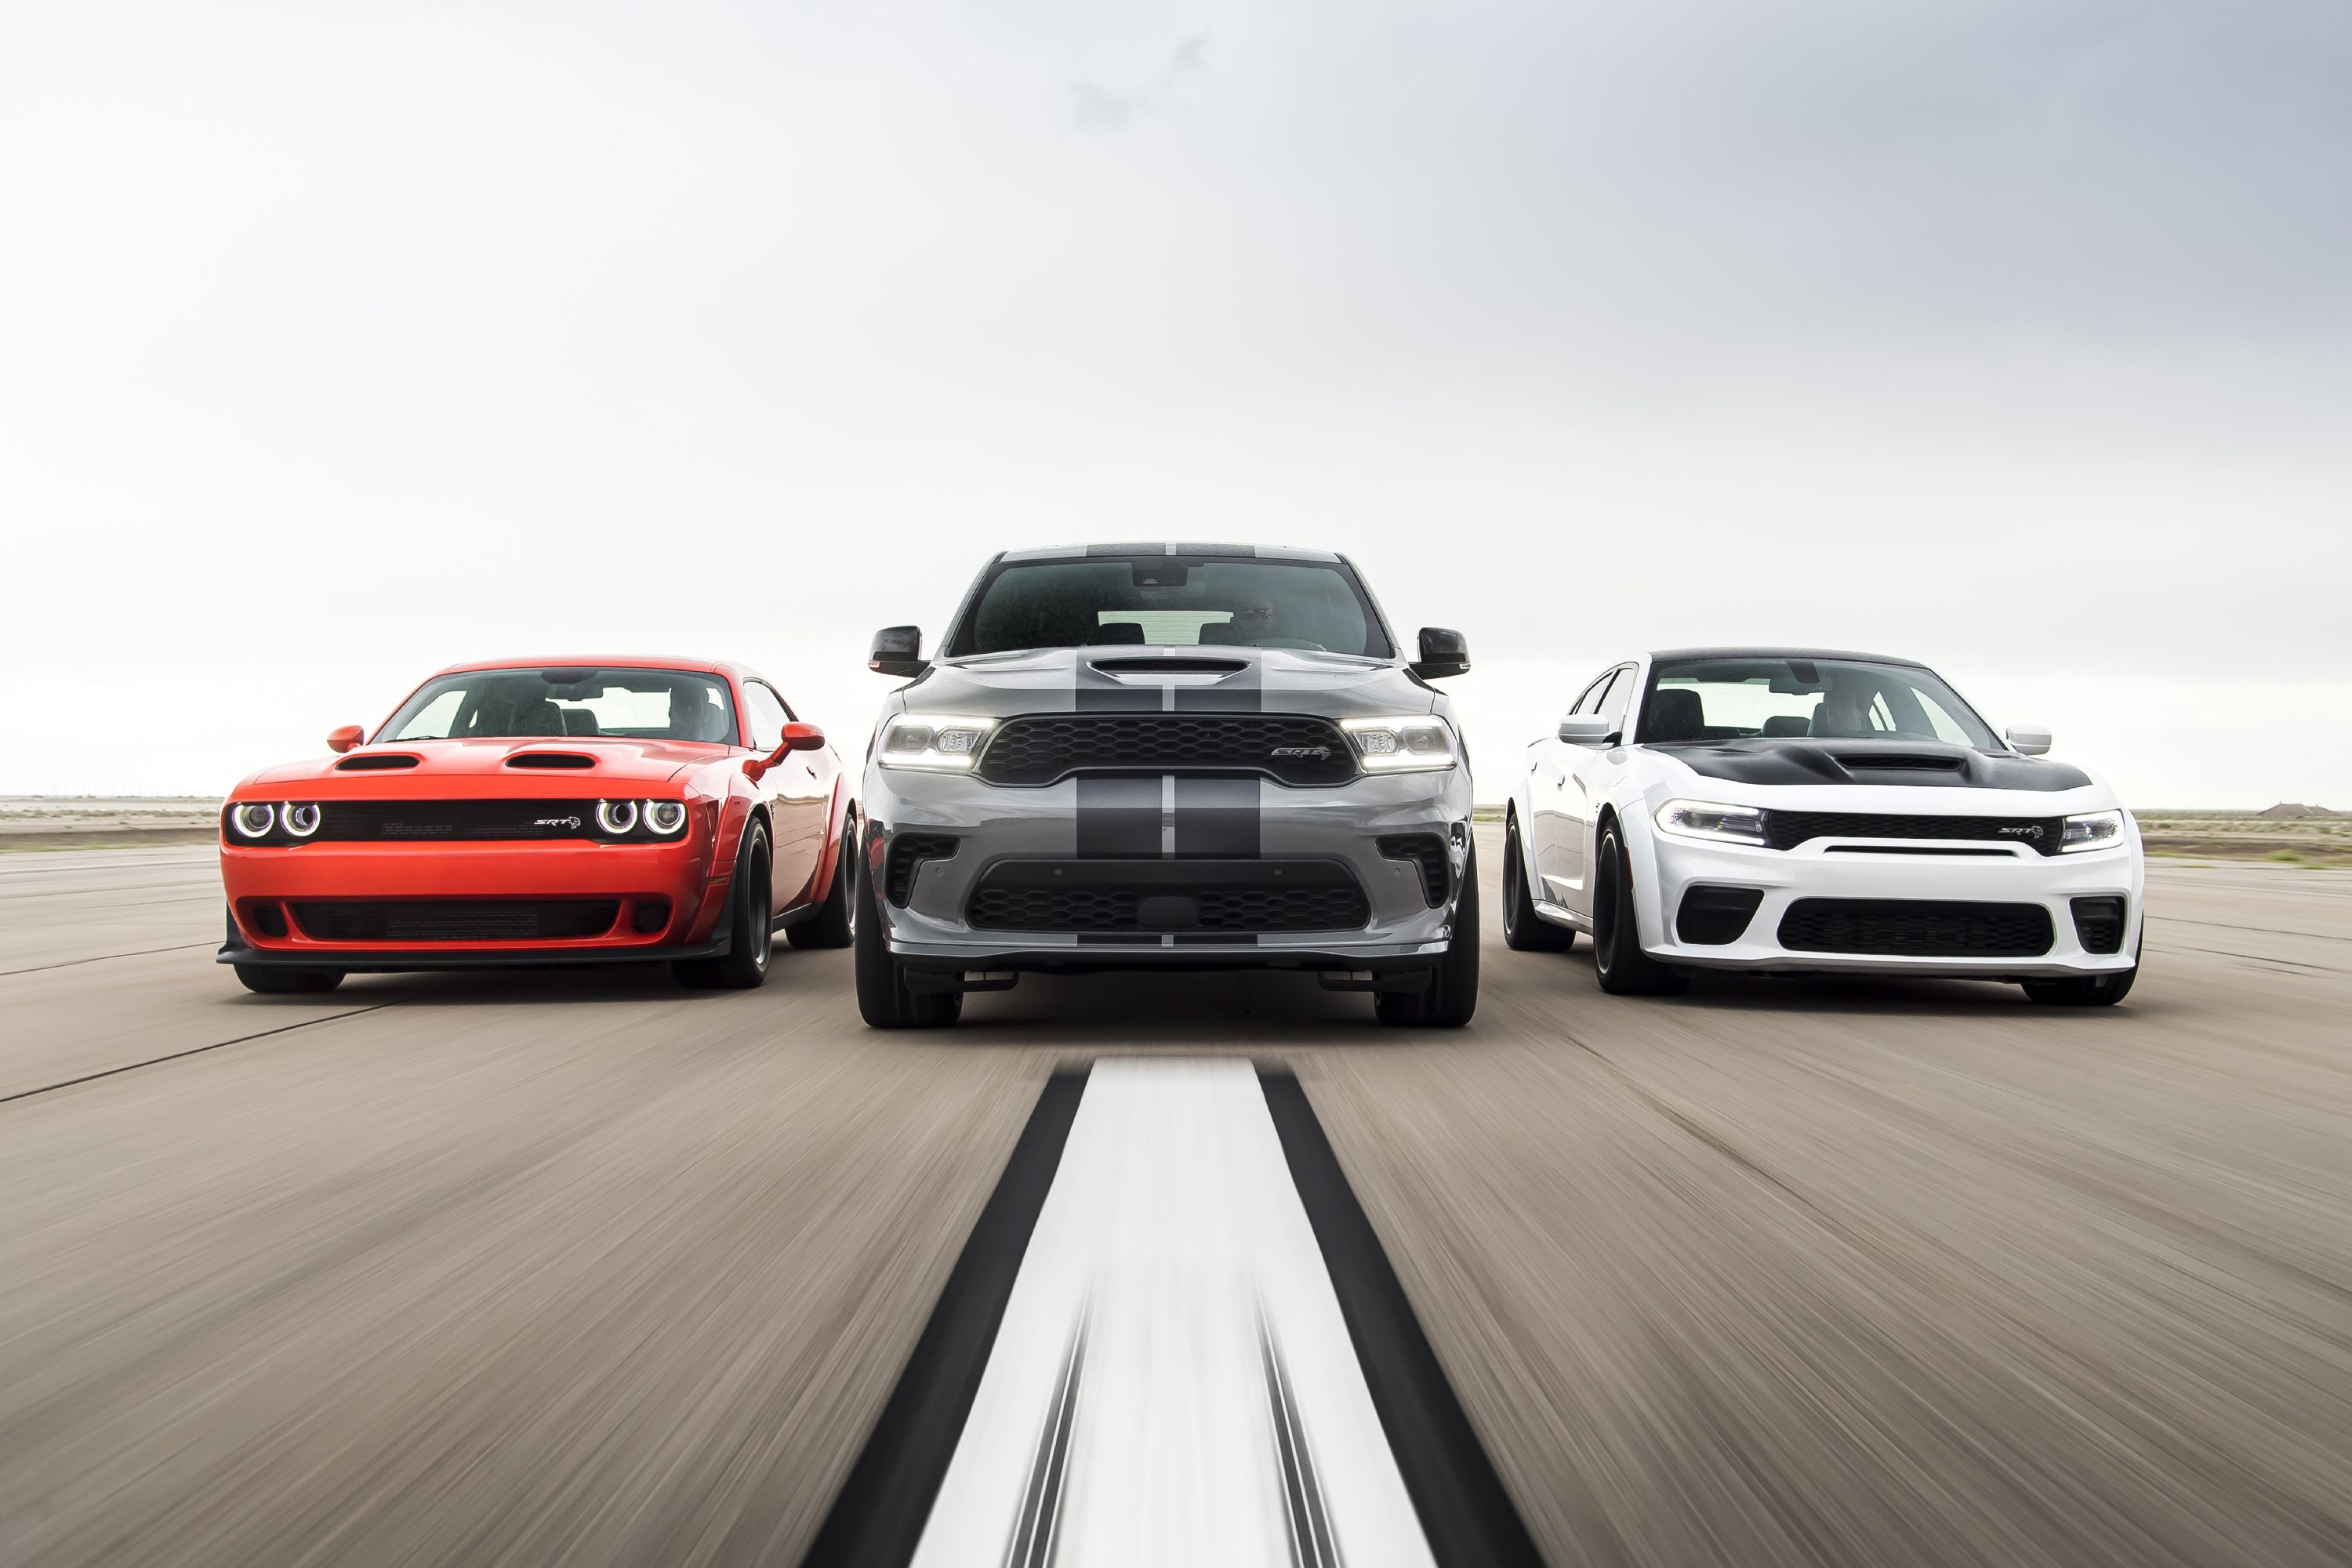 dodge upcoming models 3 New Dodge Vehicles with at Least 3 HP Coming for 3